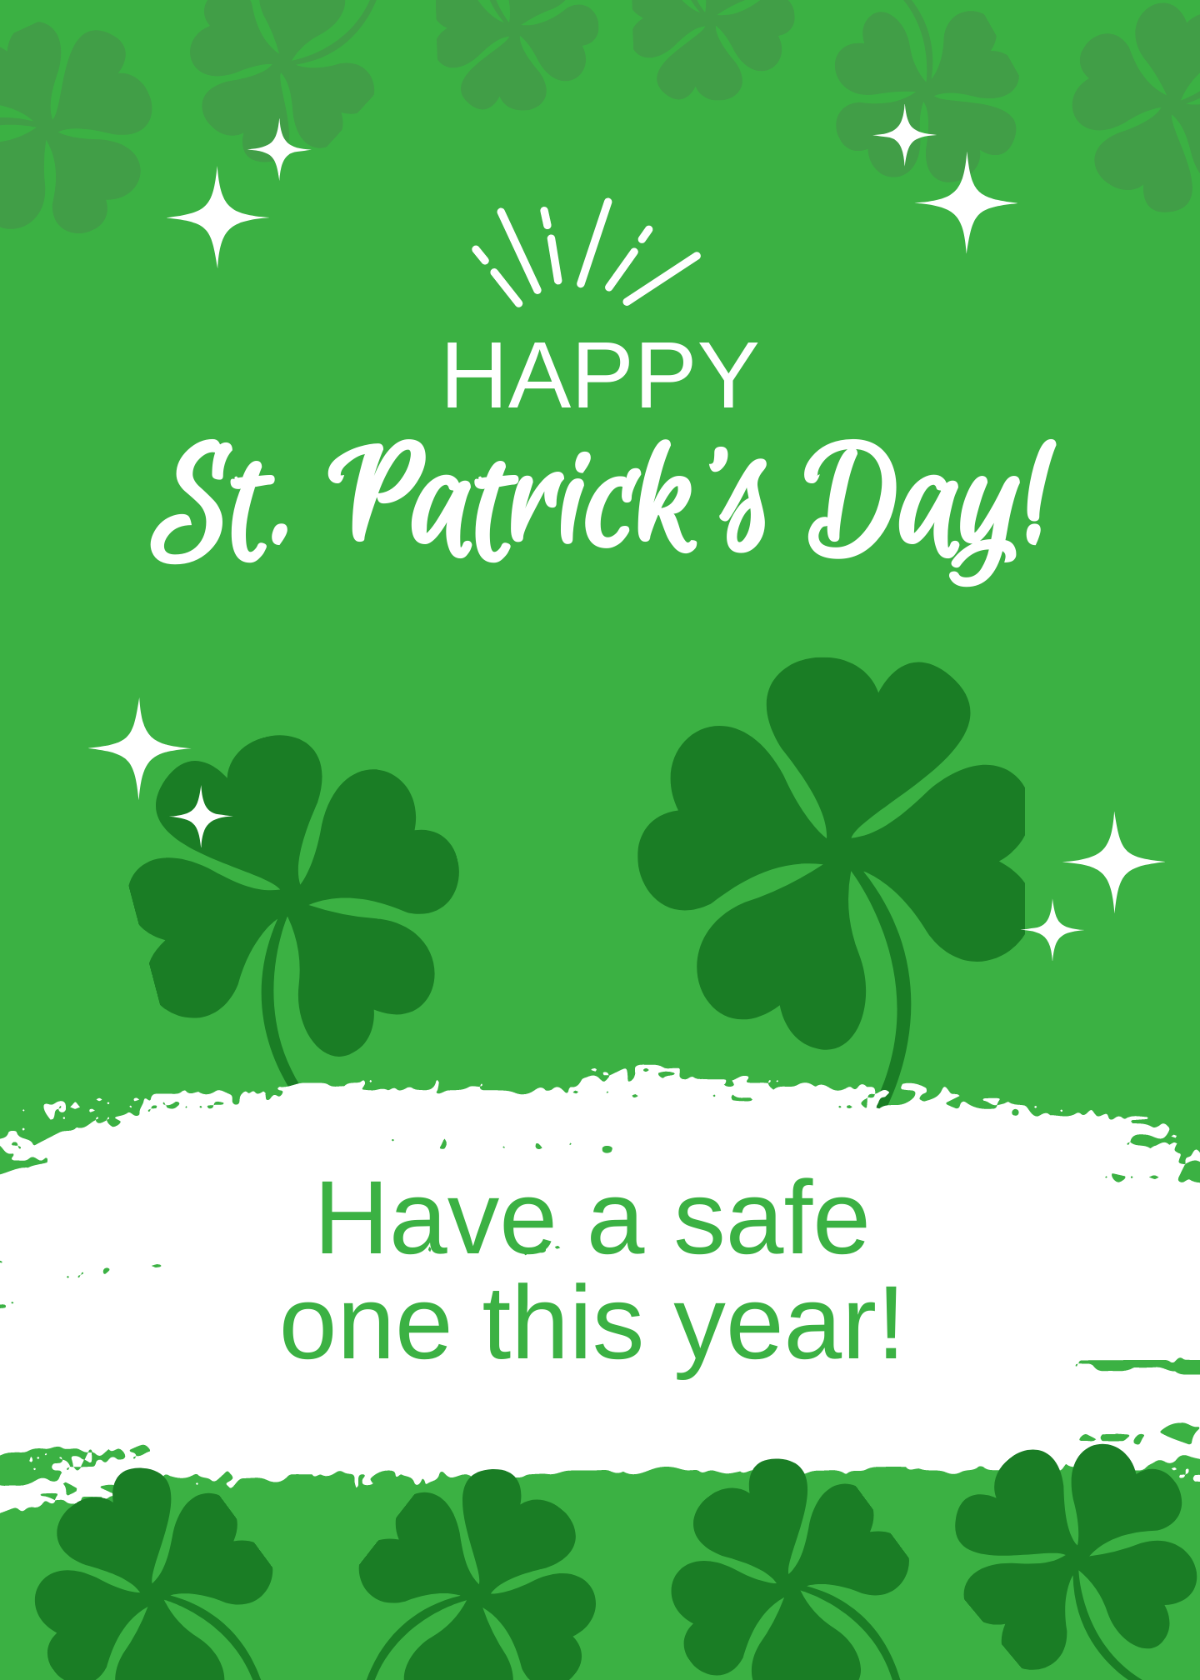 St. Patrick's Day Message